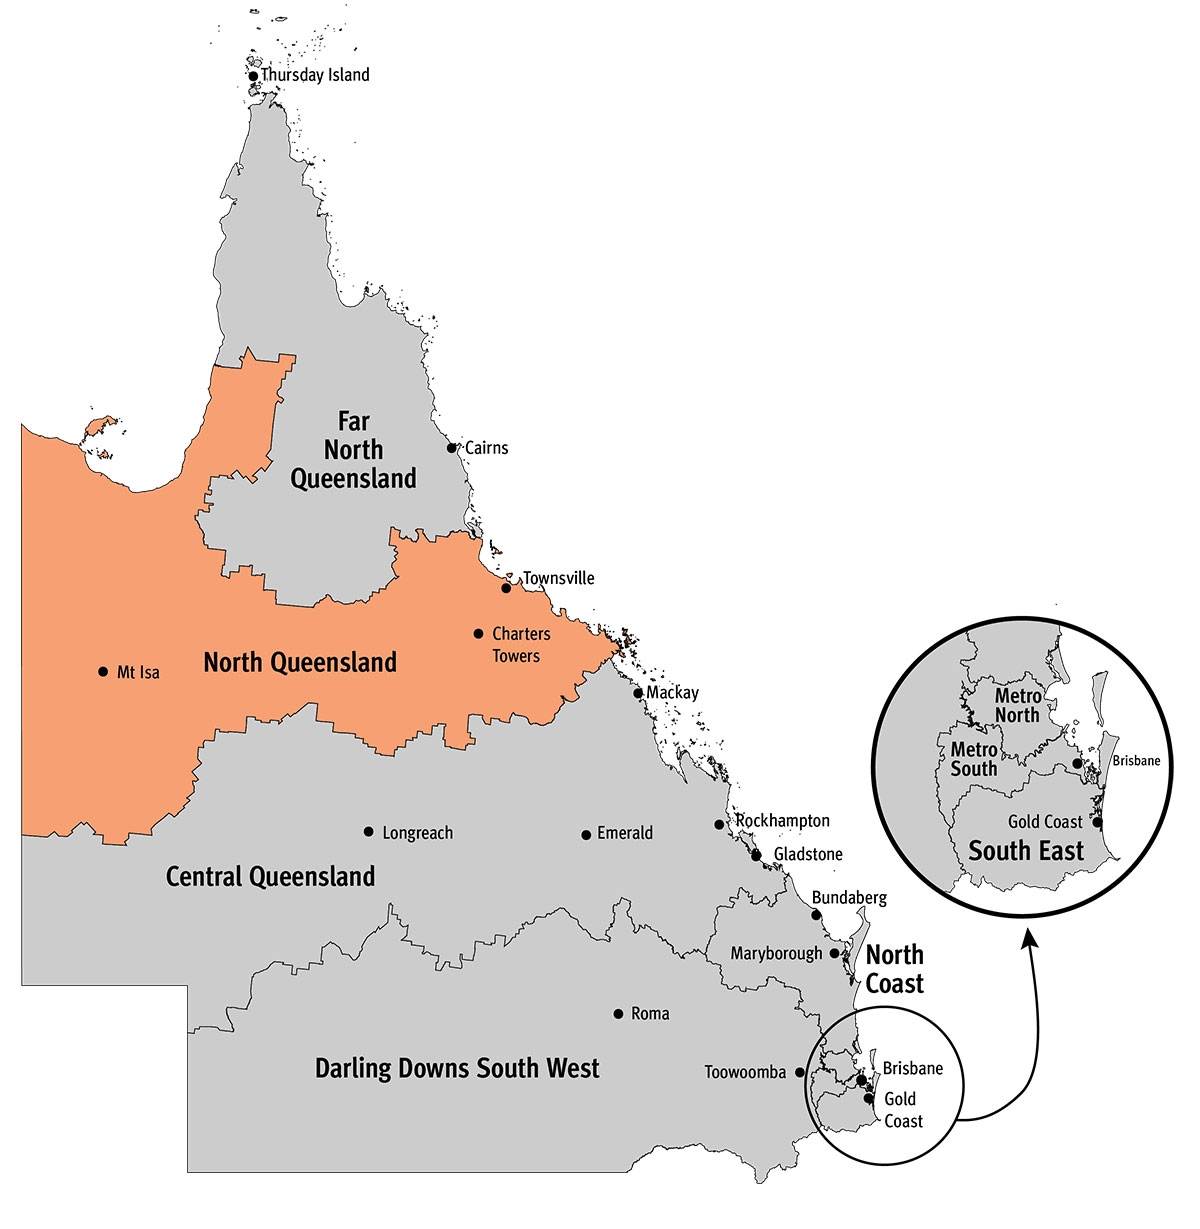 Queensland map with North Queensland region highlighted. Townsville, Charters Towers and Mt Isa are included in this region.